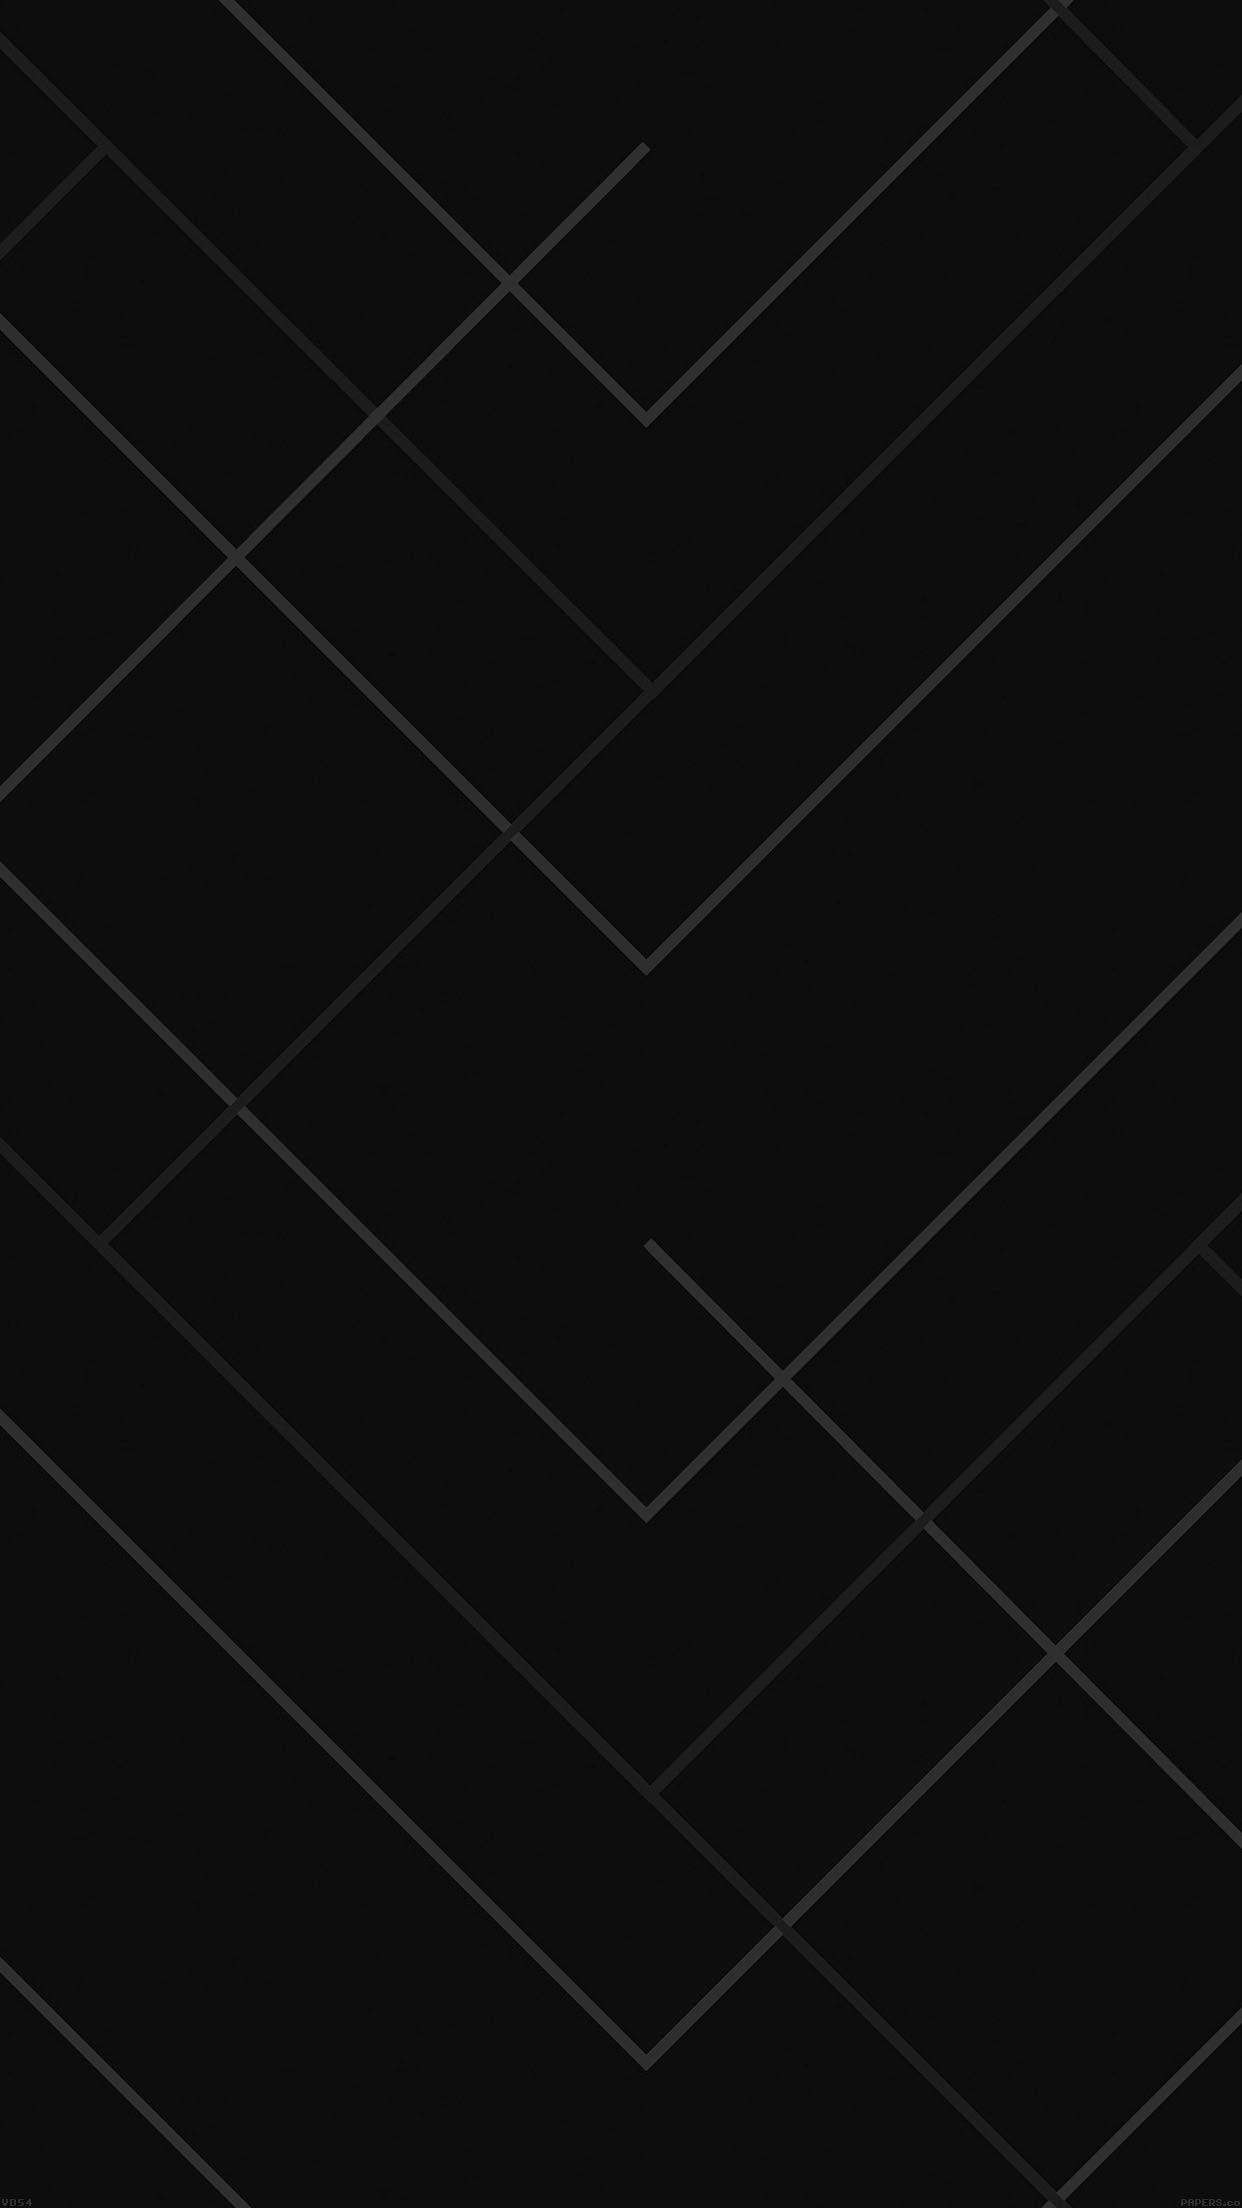 Abstract Black Geometric Line Pattern Android wallpaper